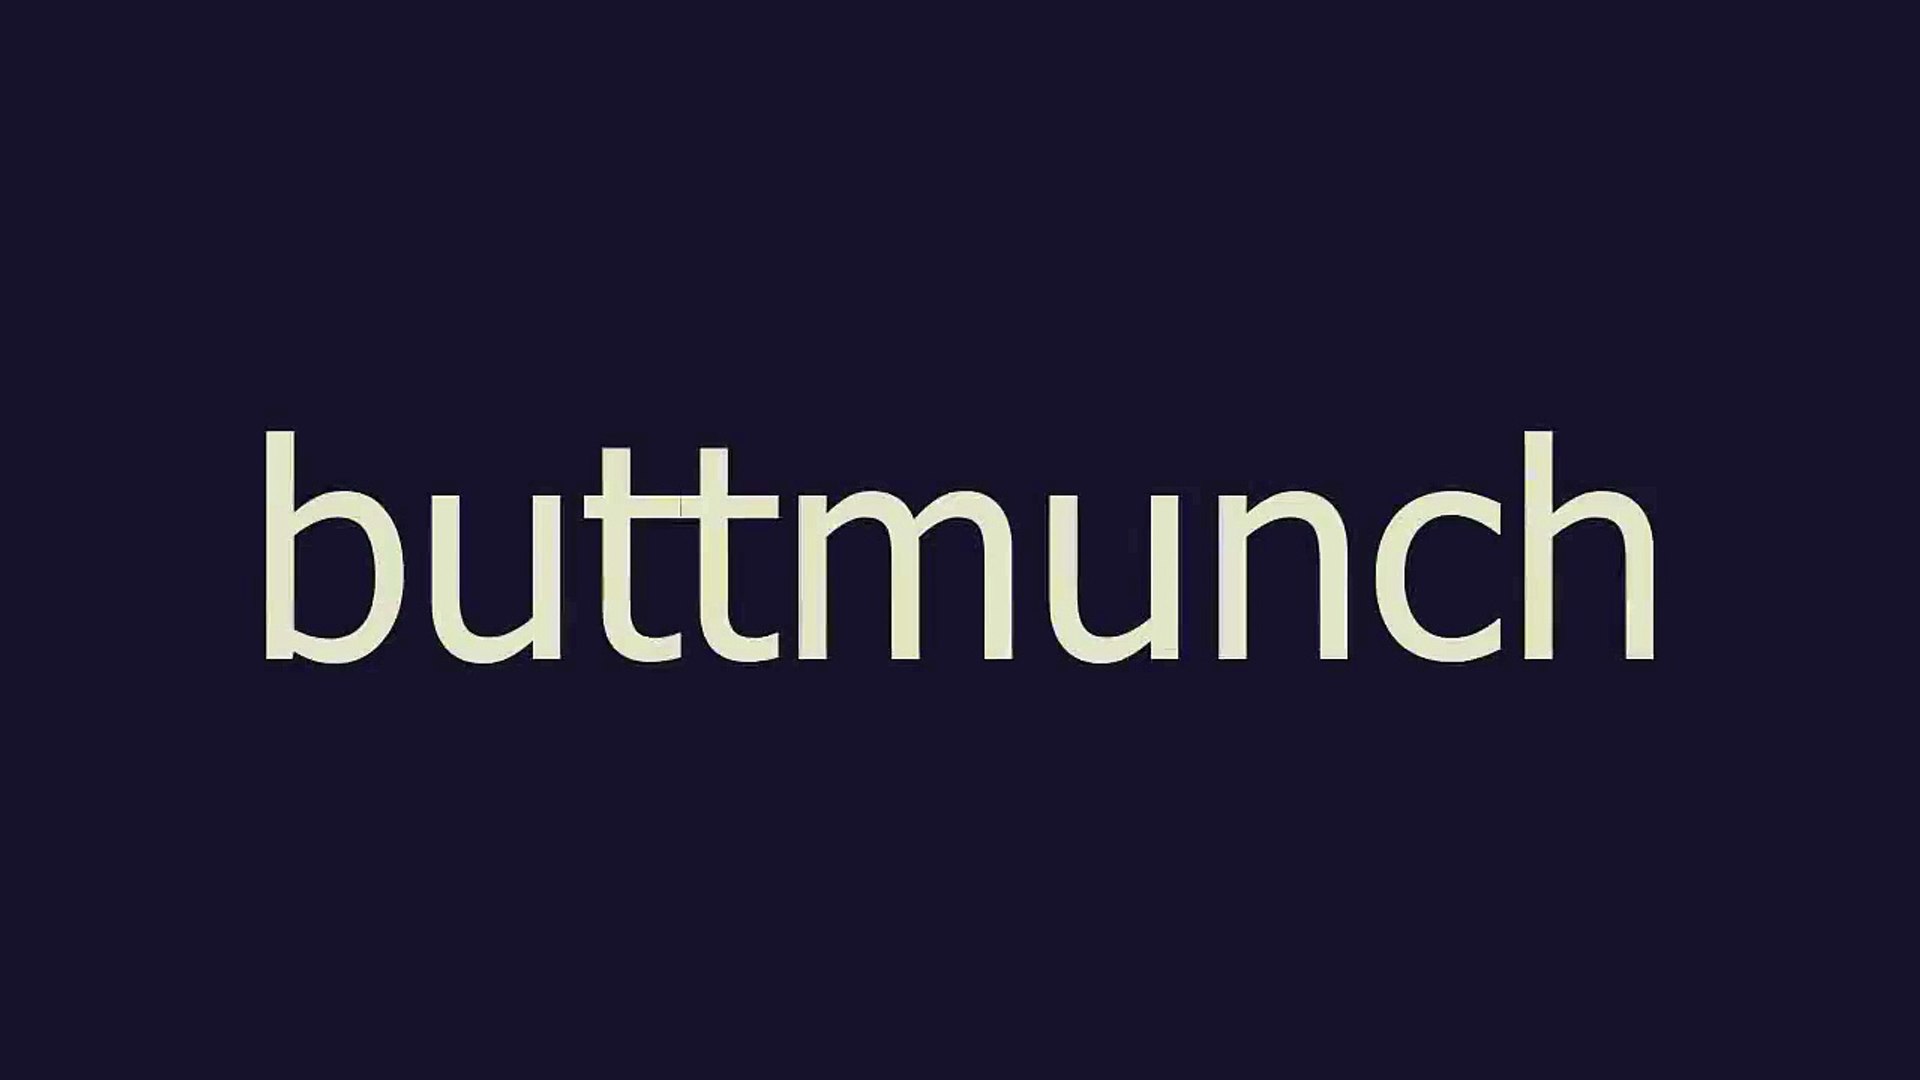 butt munch meaning and pronunciation - video Dailymotion